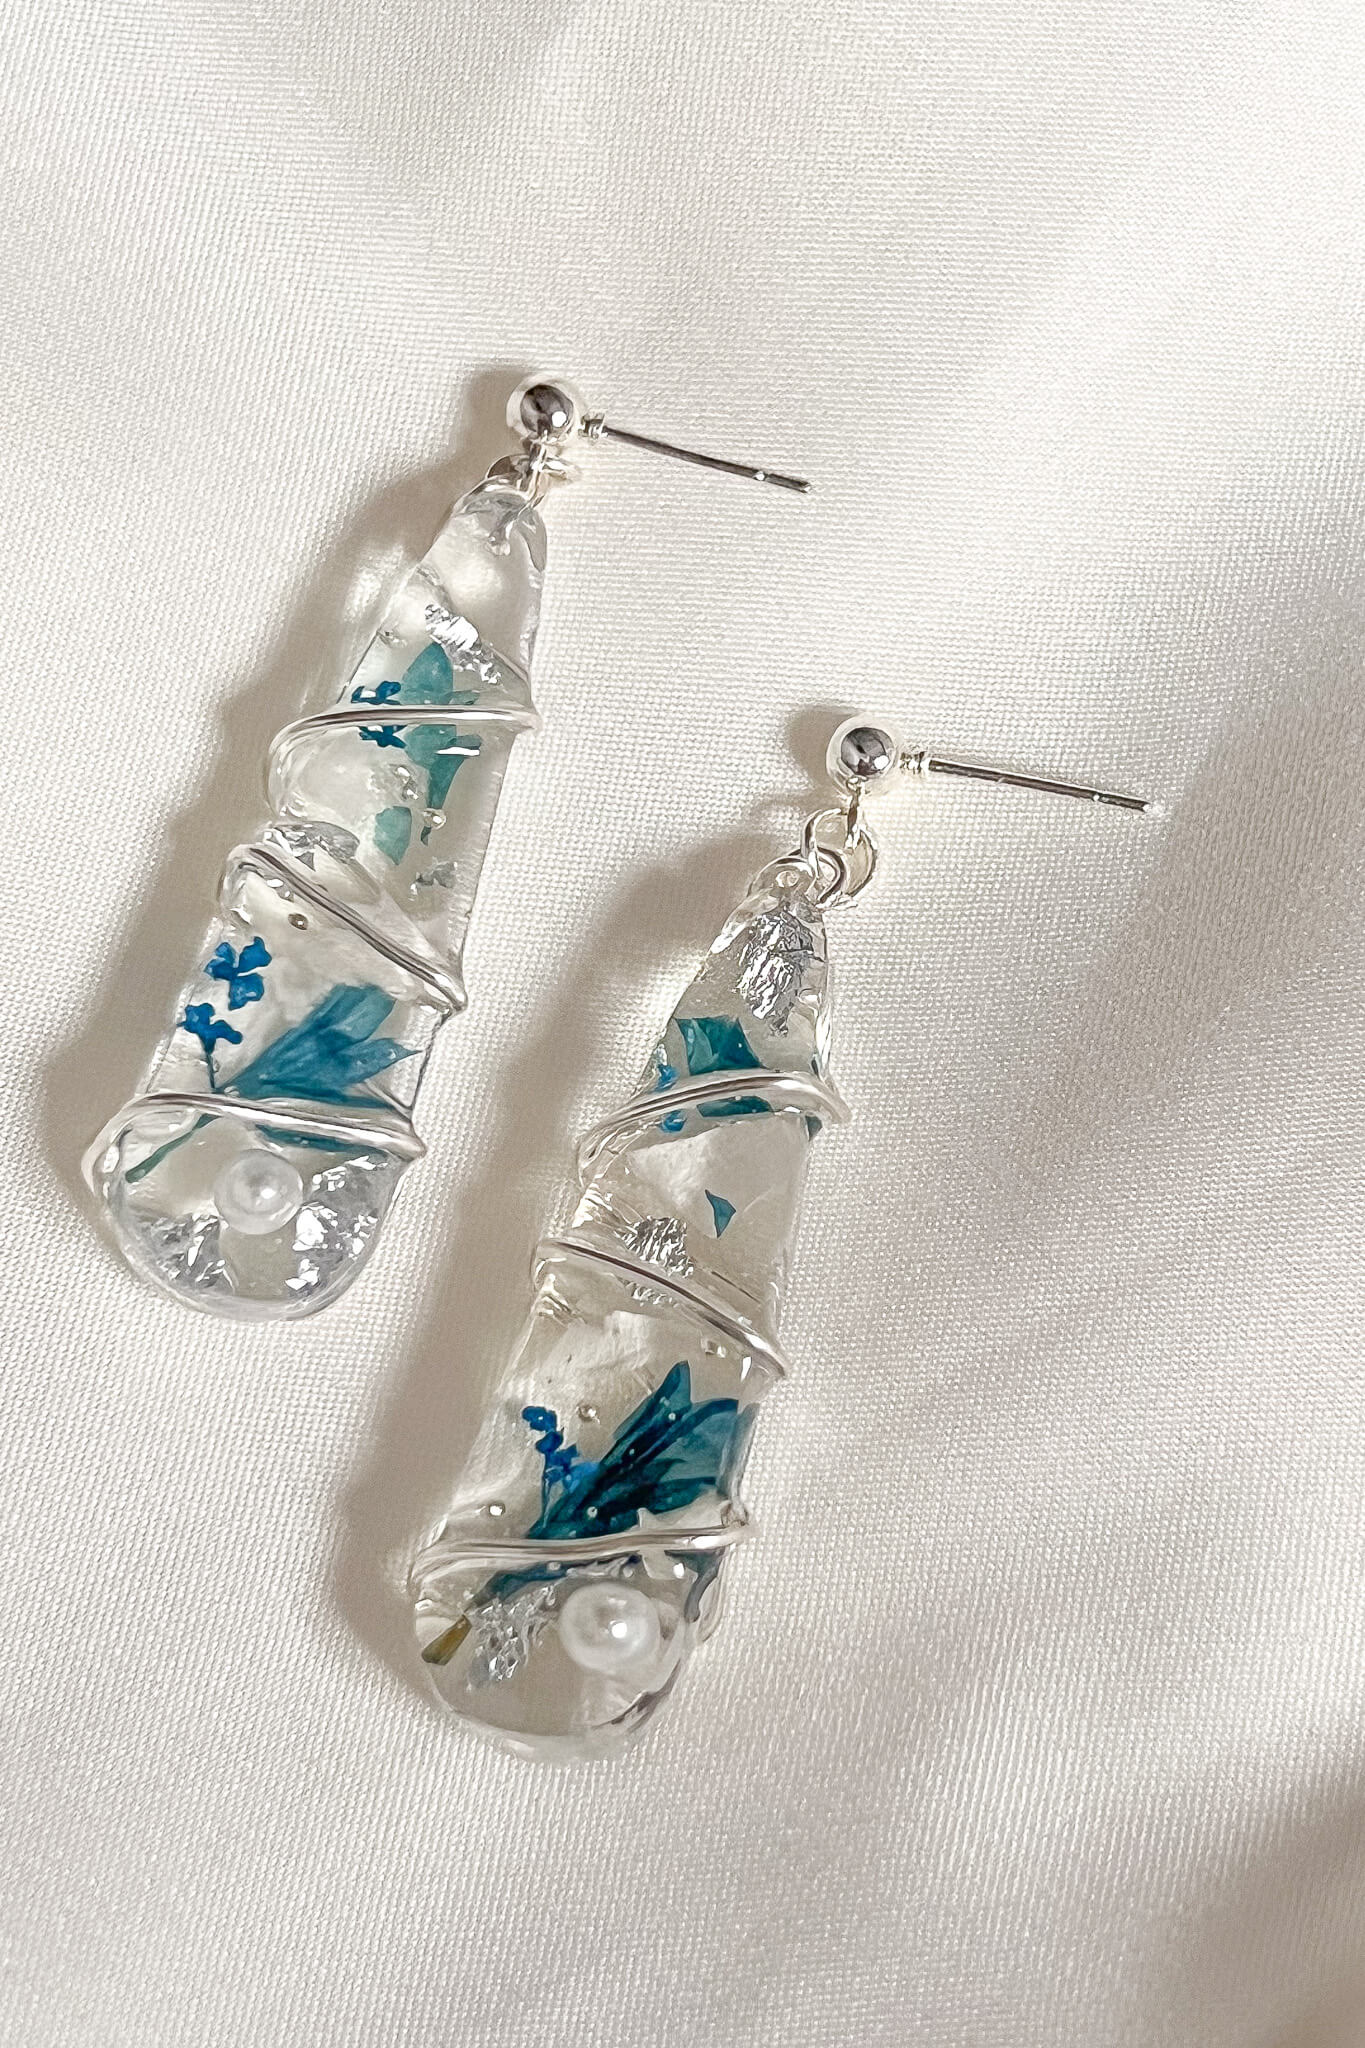 icy look silver dangle earrings - flowers and pearls in resin wrapped with silver jewelry wire